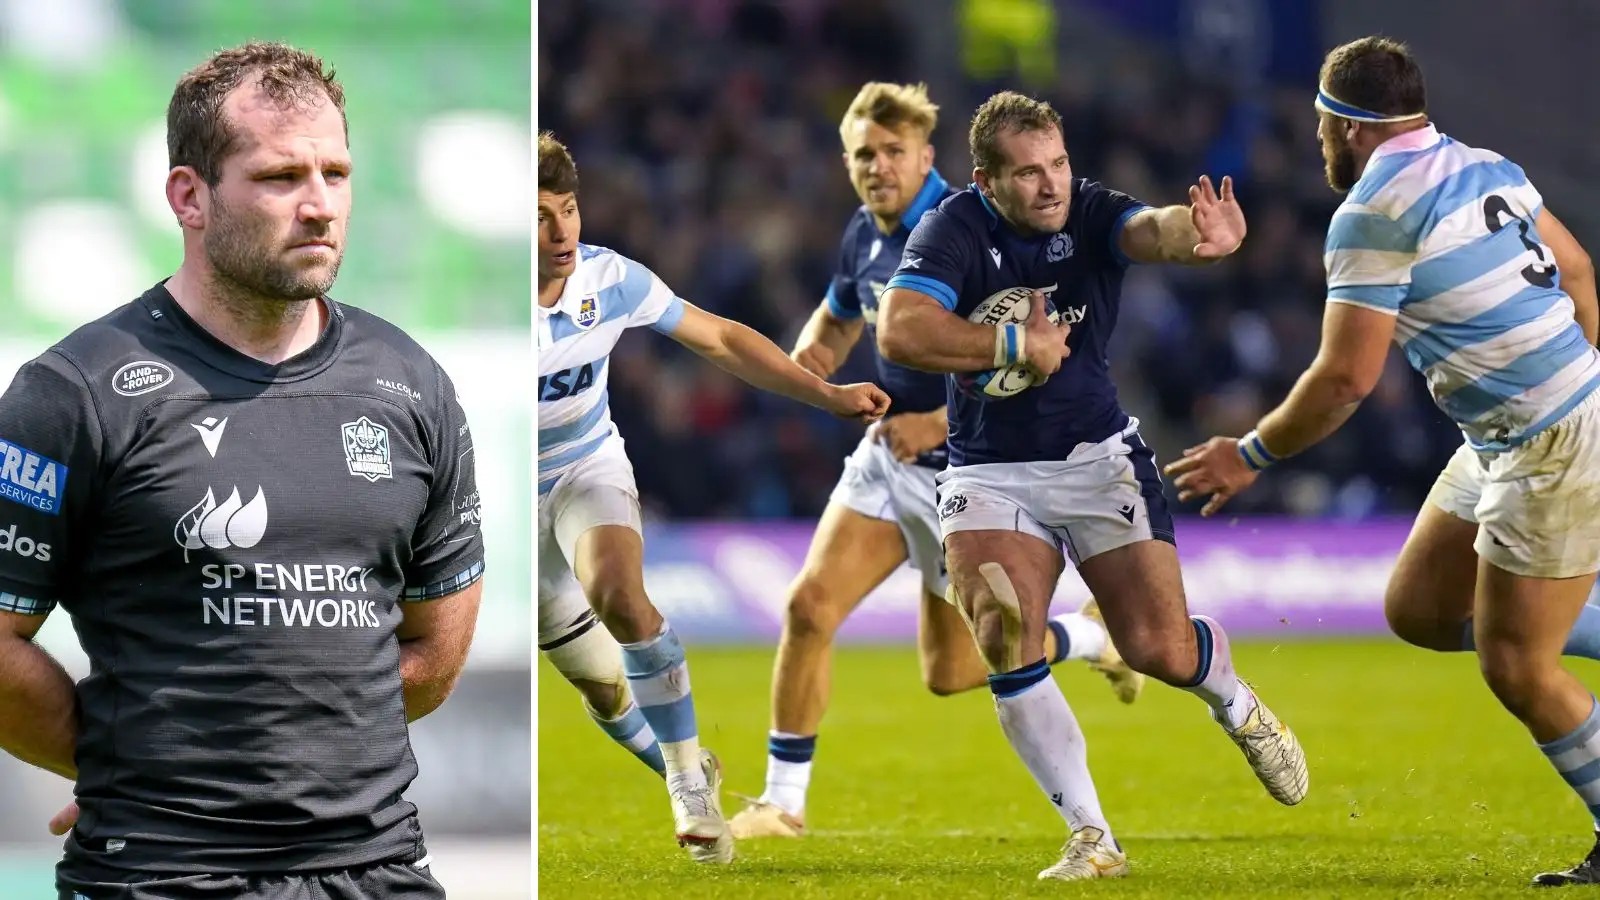 Scotland and Glasgow Warriors hooker Fraser Brown has commented on his Rugby World Cup disappointment ahead of the Challenge Cup final against Toulon.